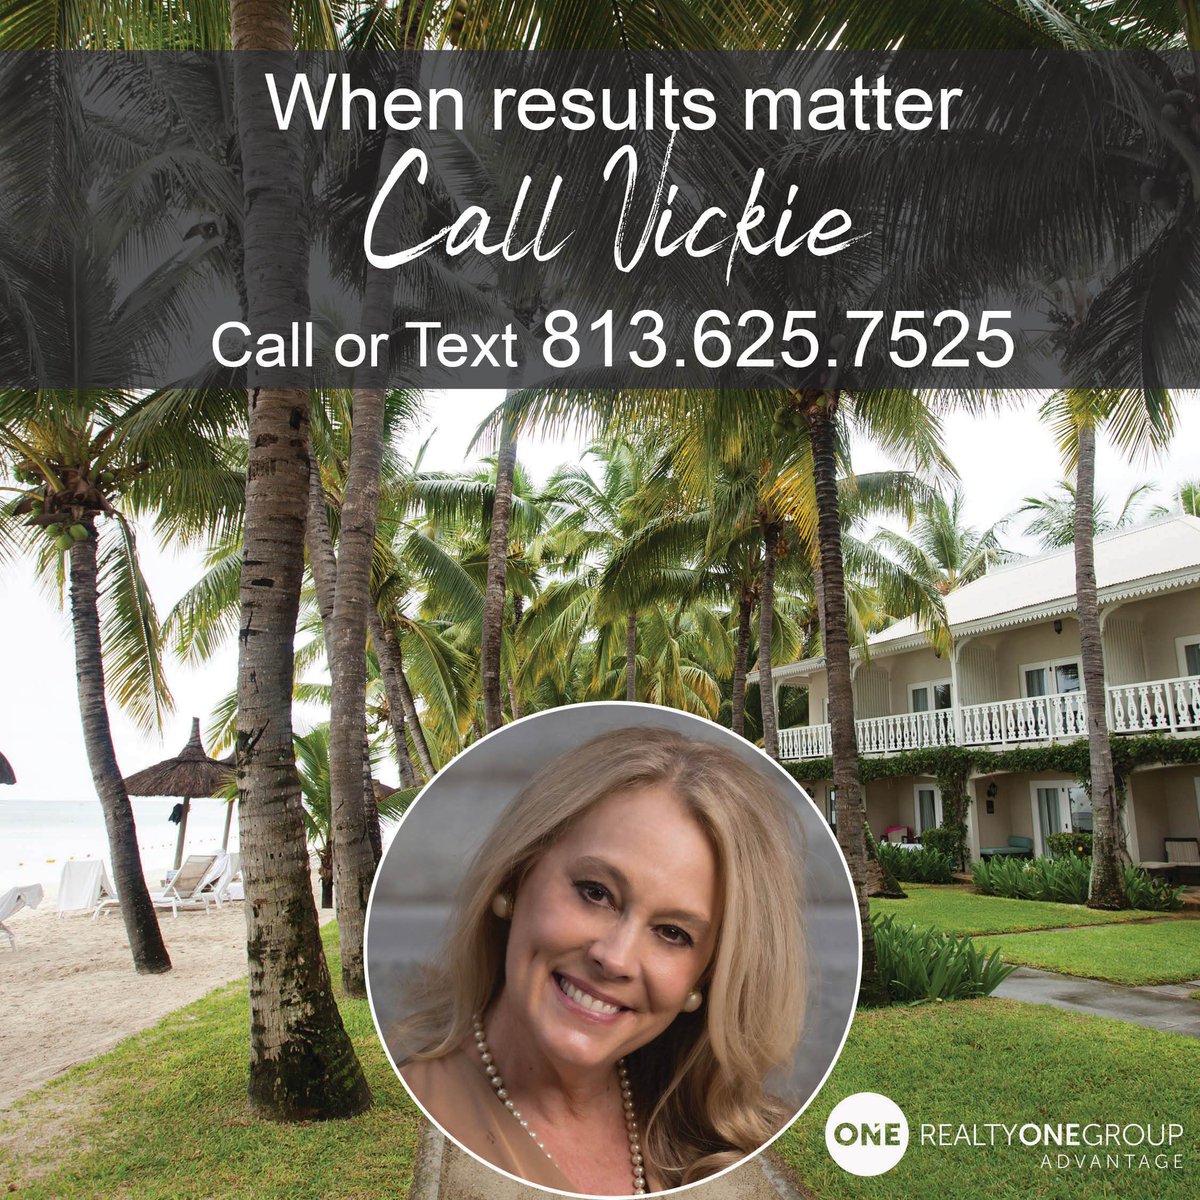 When results matter, call Vickie Mitchell with Realty ONE Group Advantage at 813-625-7525.

#icanhelpyoubuyorsell #realtor #realestate #buyingahome #sellingahome #vickiemitchellsellsFL #realtyonegroupadvantage #tampa #lutz #landolakesFL #tampabayrealestate #tampahomes...